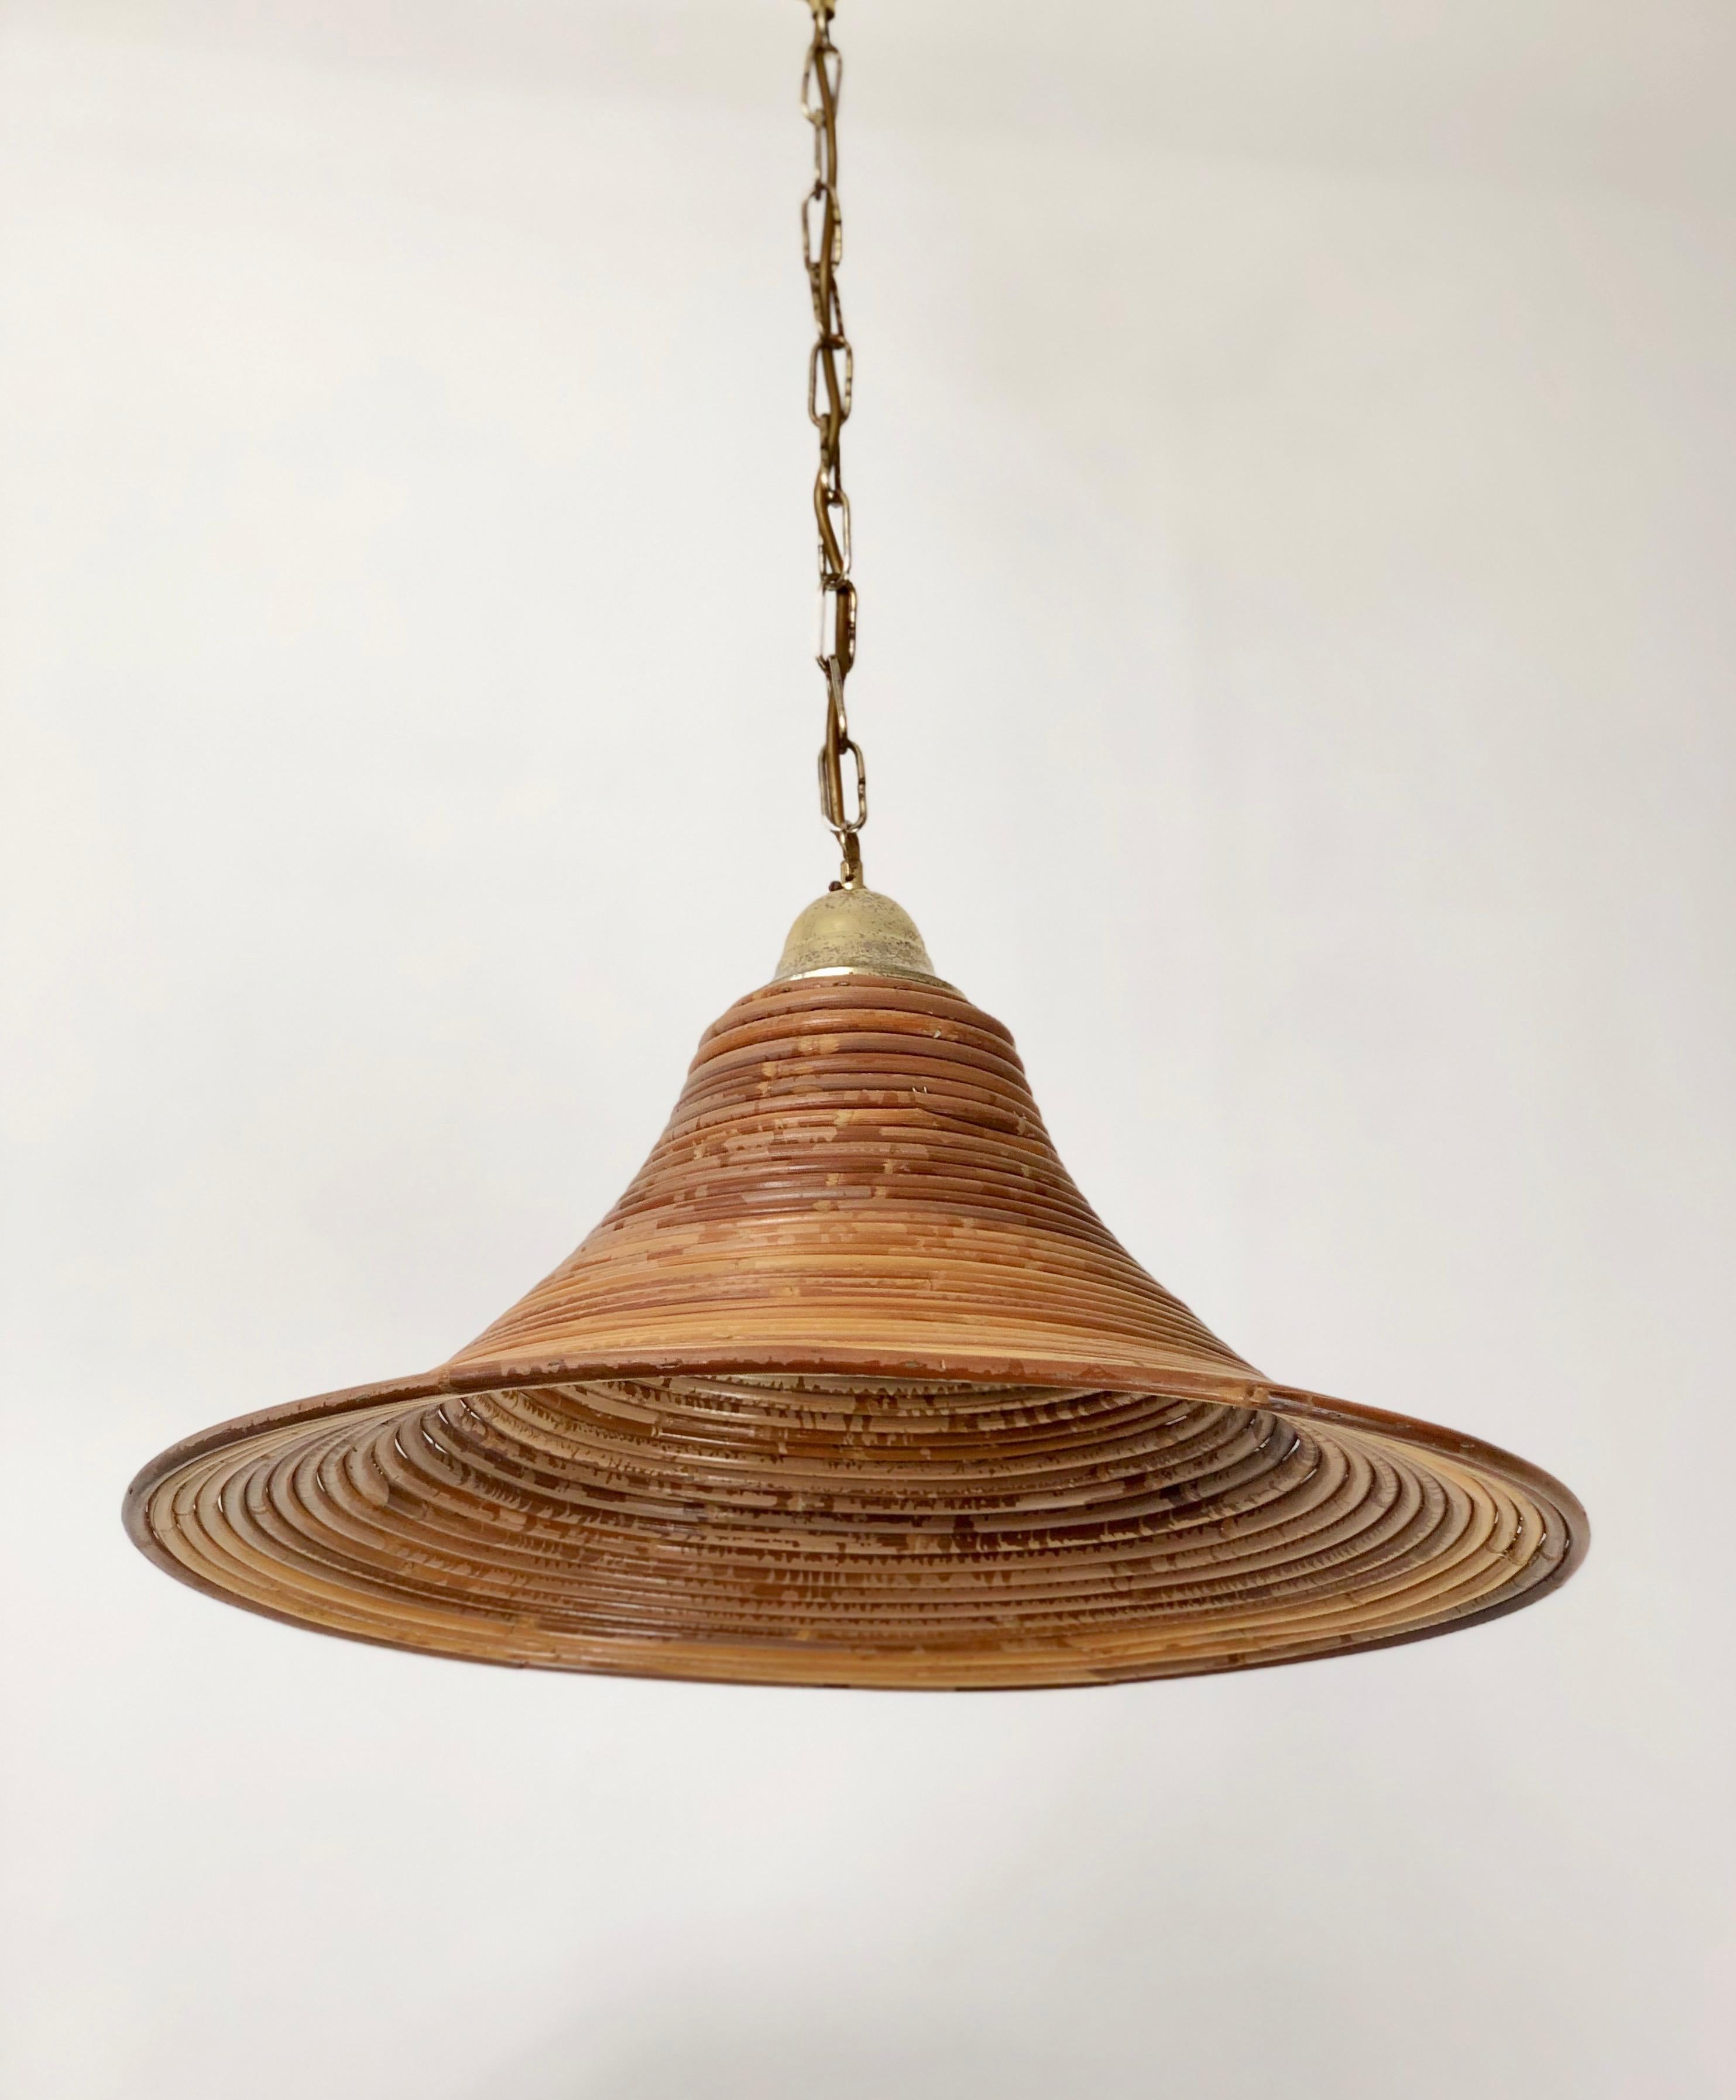 Italian Bamboo and Brass Rattan Chandelier Pendant Light, Crespi Style, Italy, 1950s